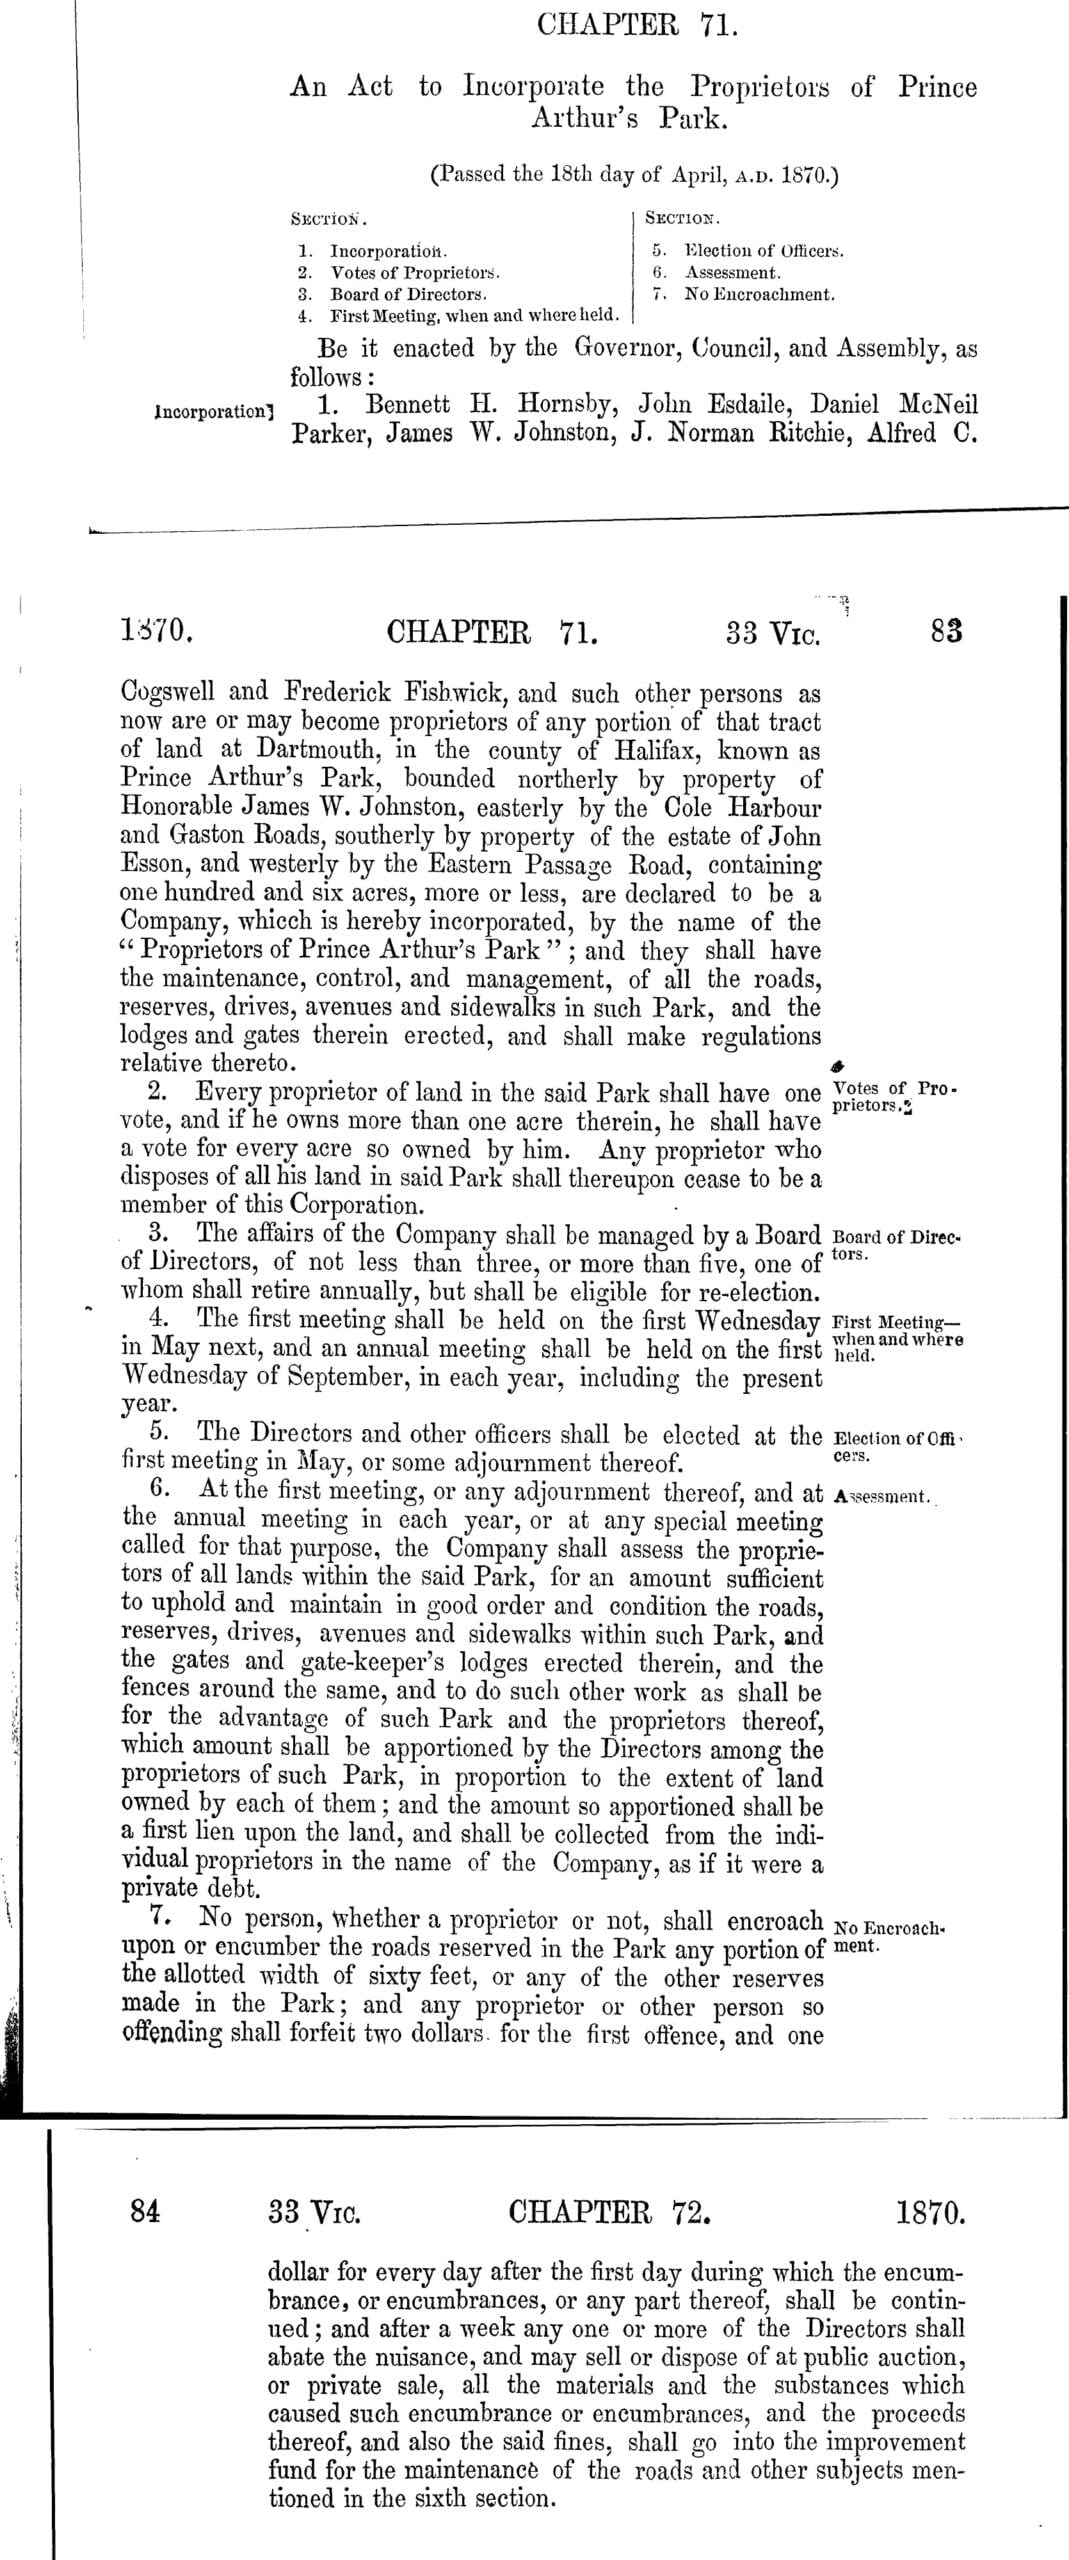 An Act to Incorporate the Proprietors of Prince Arthur Park, 1870 c71